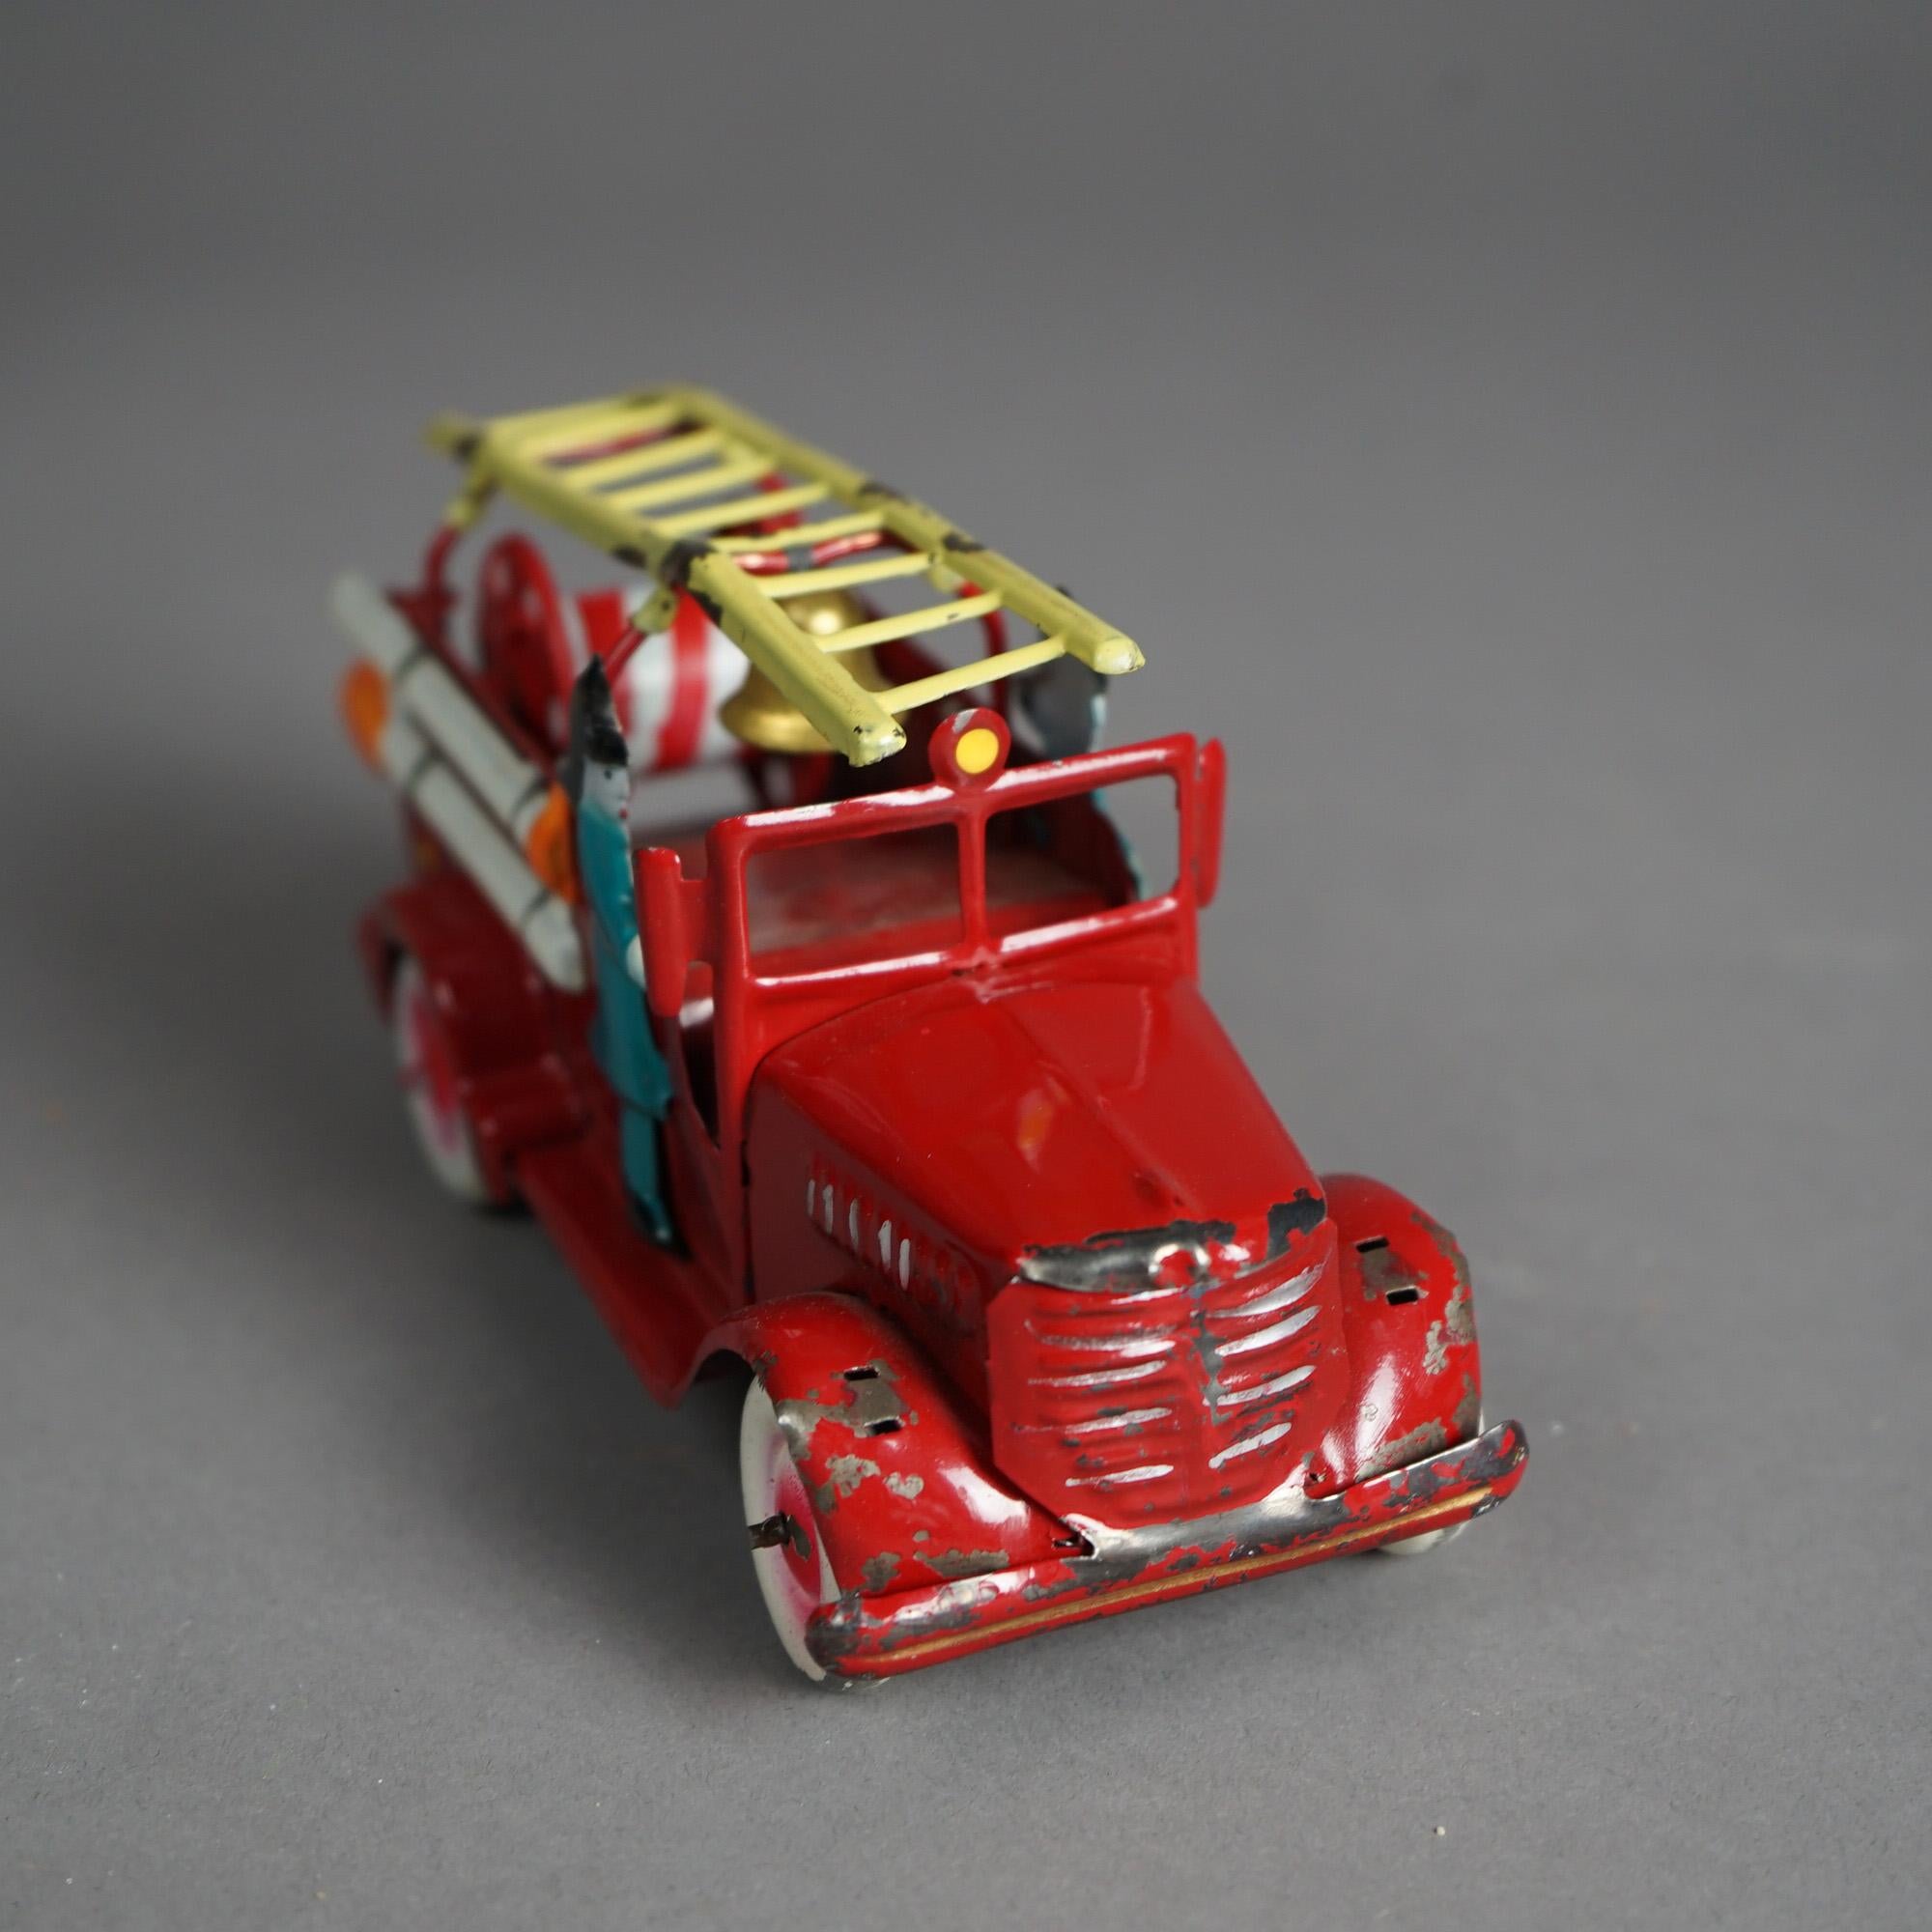 Japanese Tin Litho Toy Fire Engine In The Original Box Circa 1950 2